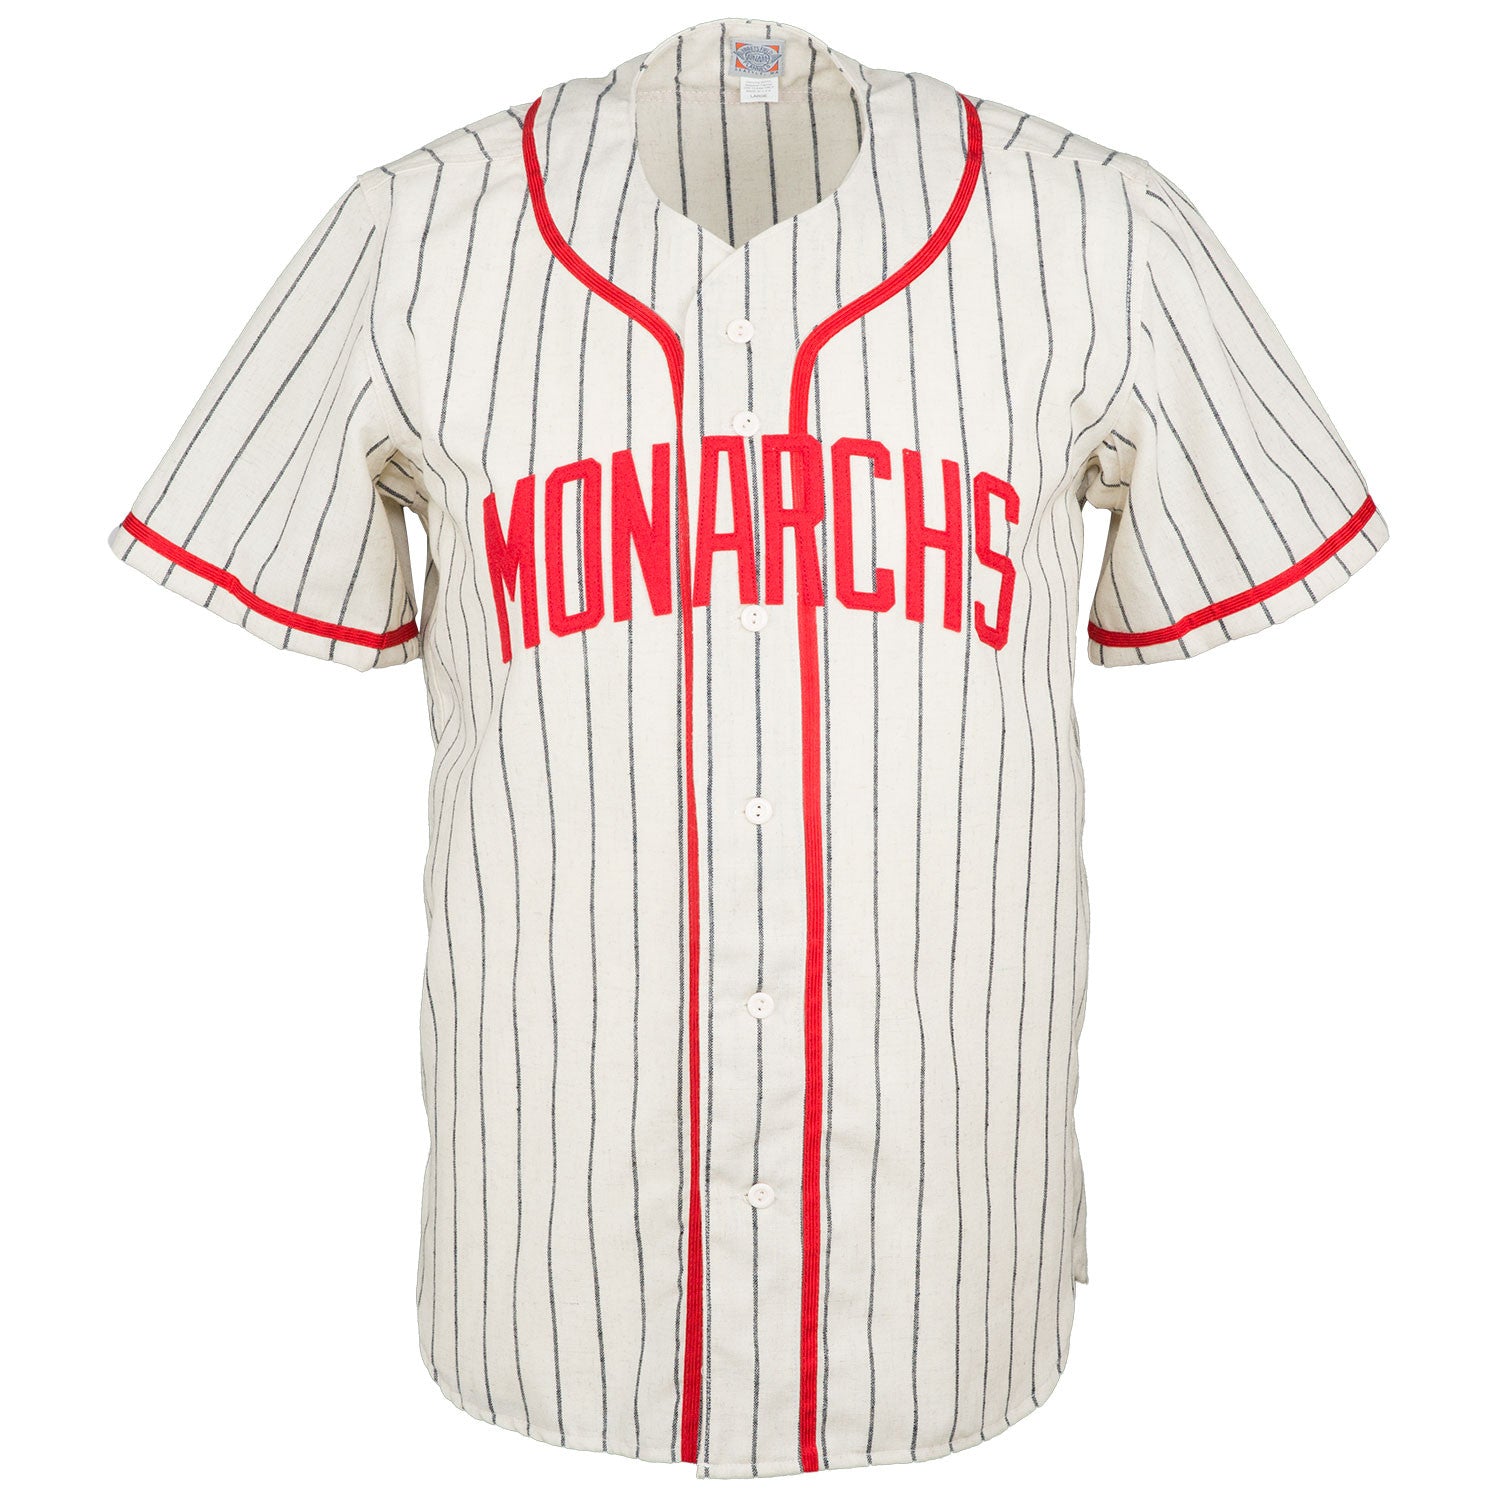 Team-Issued Monarchs Jersey & Pants: #34 (STL @ KC 9/22/20) - Size 52